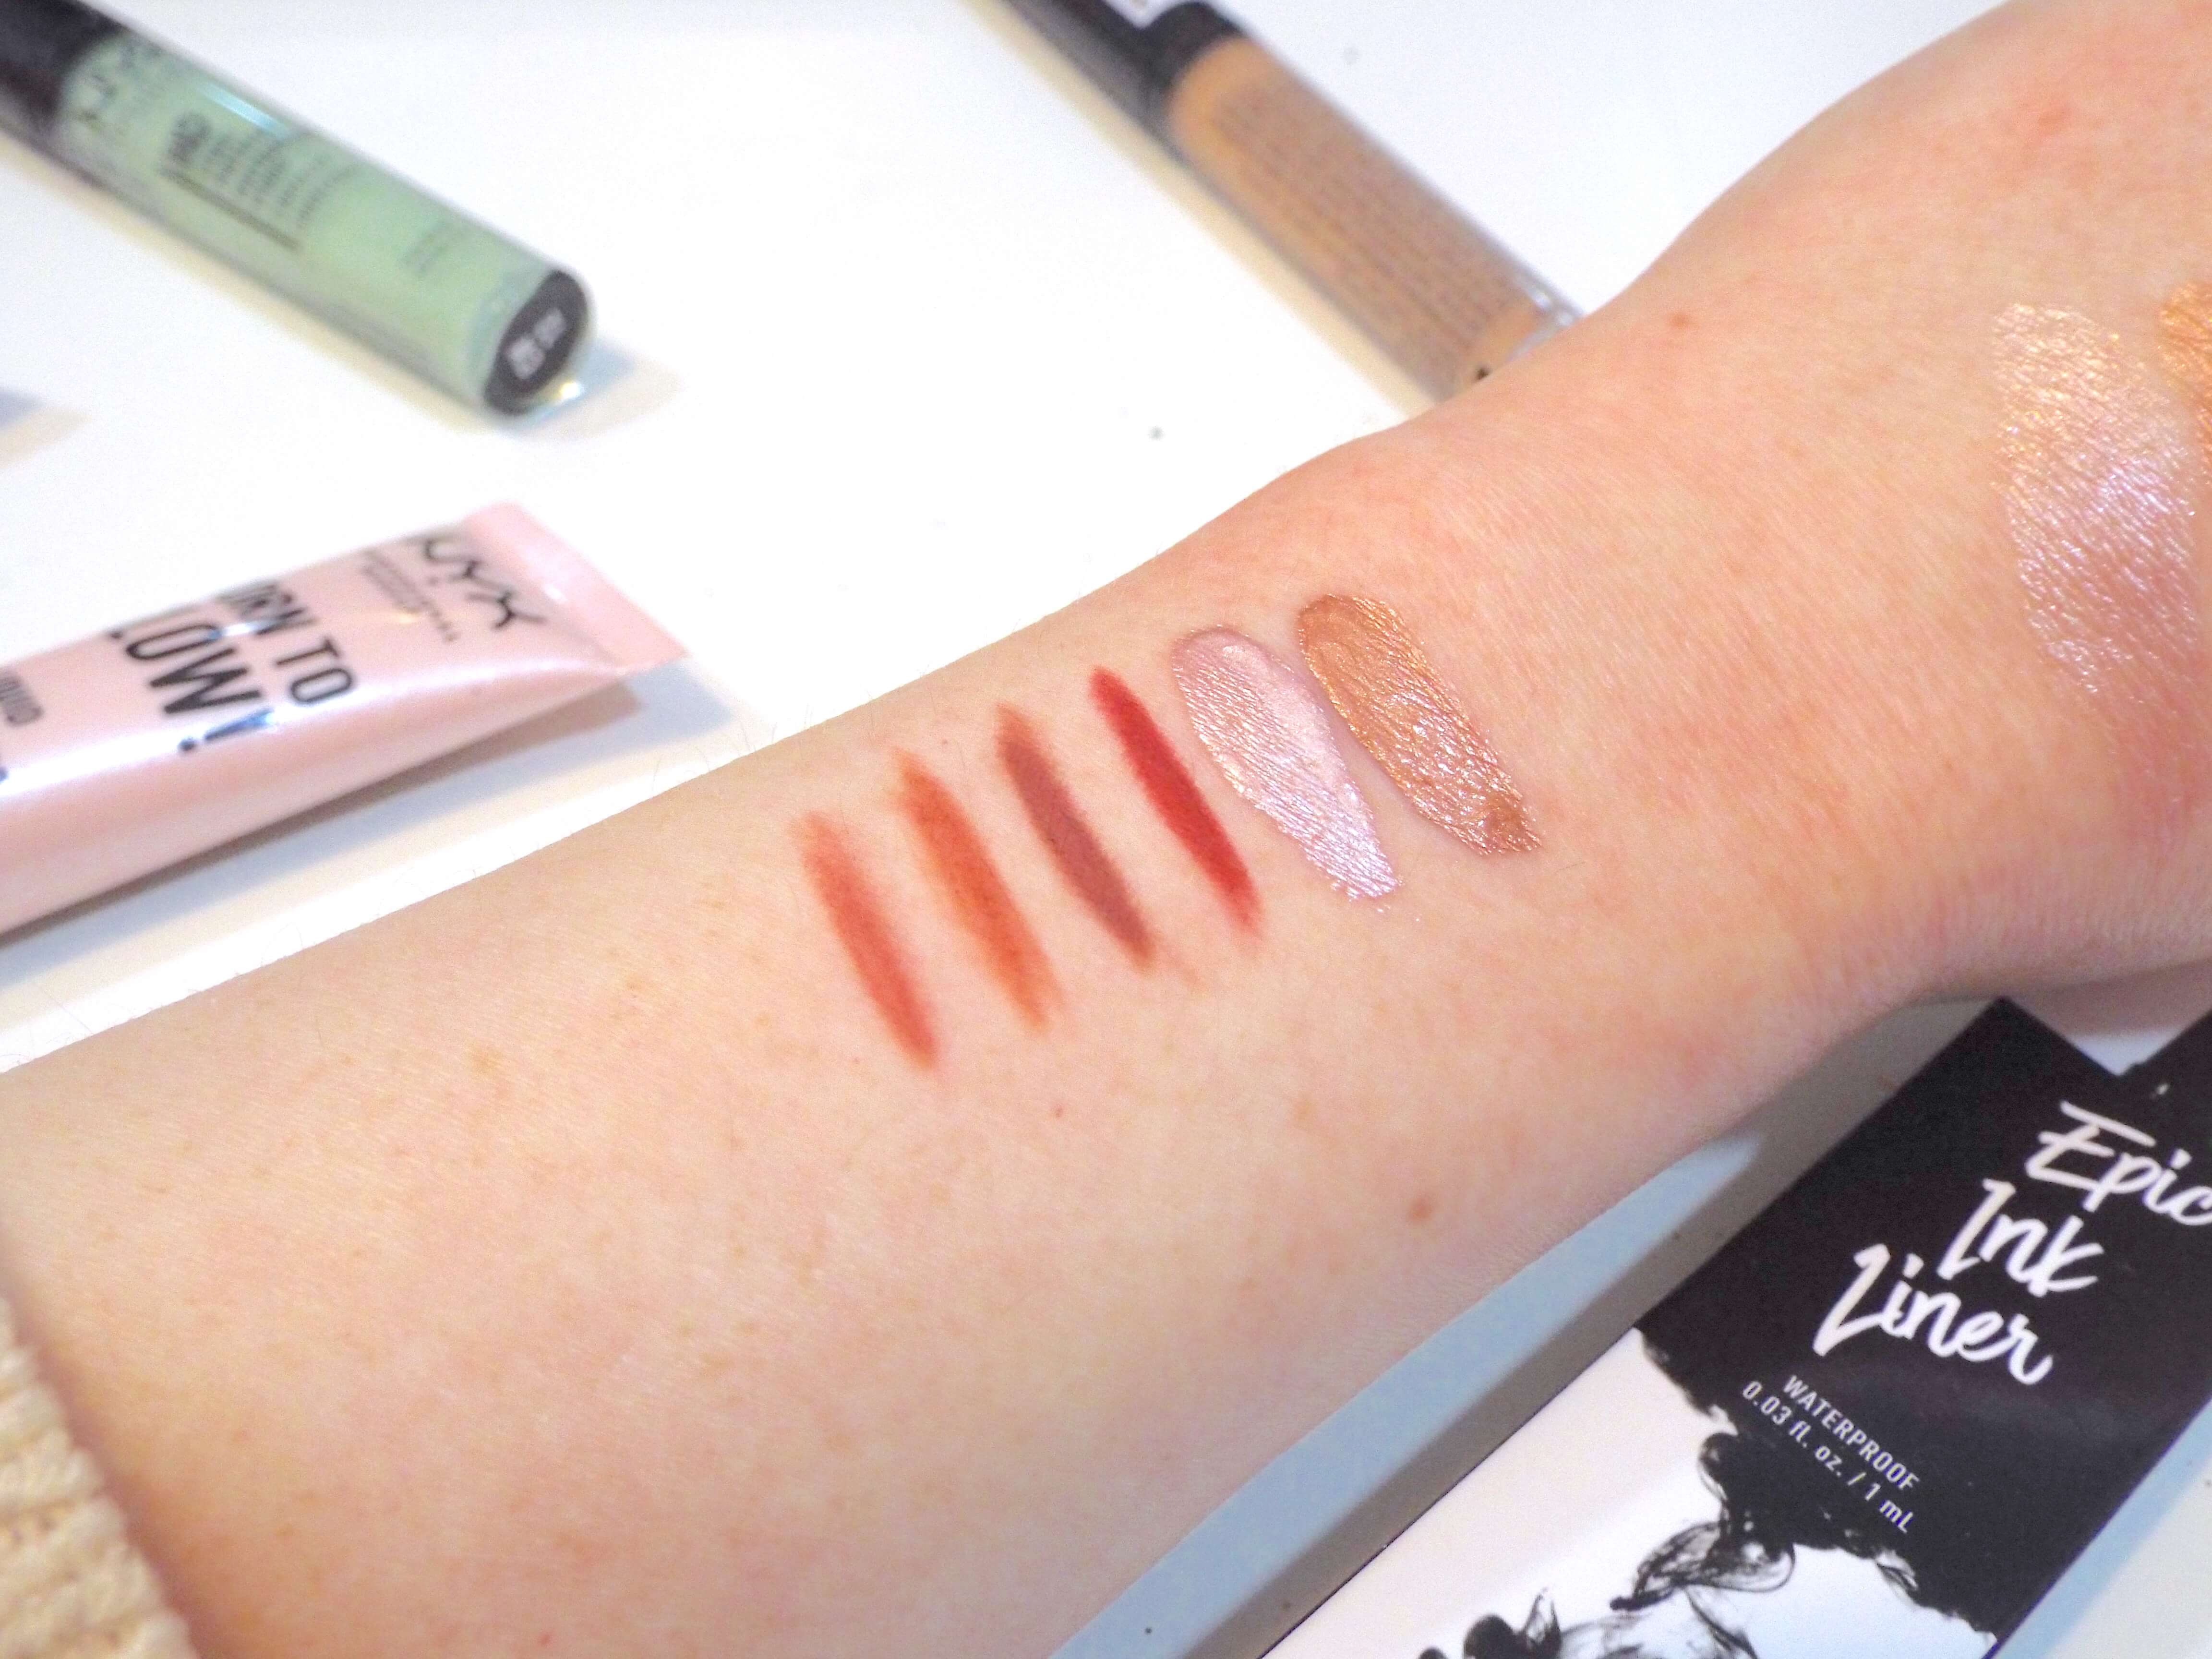 Swatches, left to right, of four NYX Lip Liners in a warm, pinky nude, warm orange nude, mauve-y pink and rose mauve-y pink, and two NYX Born to Glow Liquid Illuminators, in an icy pink shade then a deep warm golden shade.